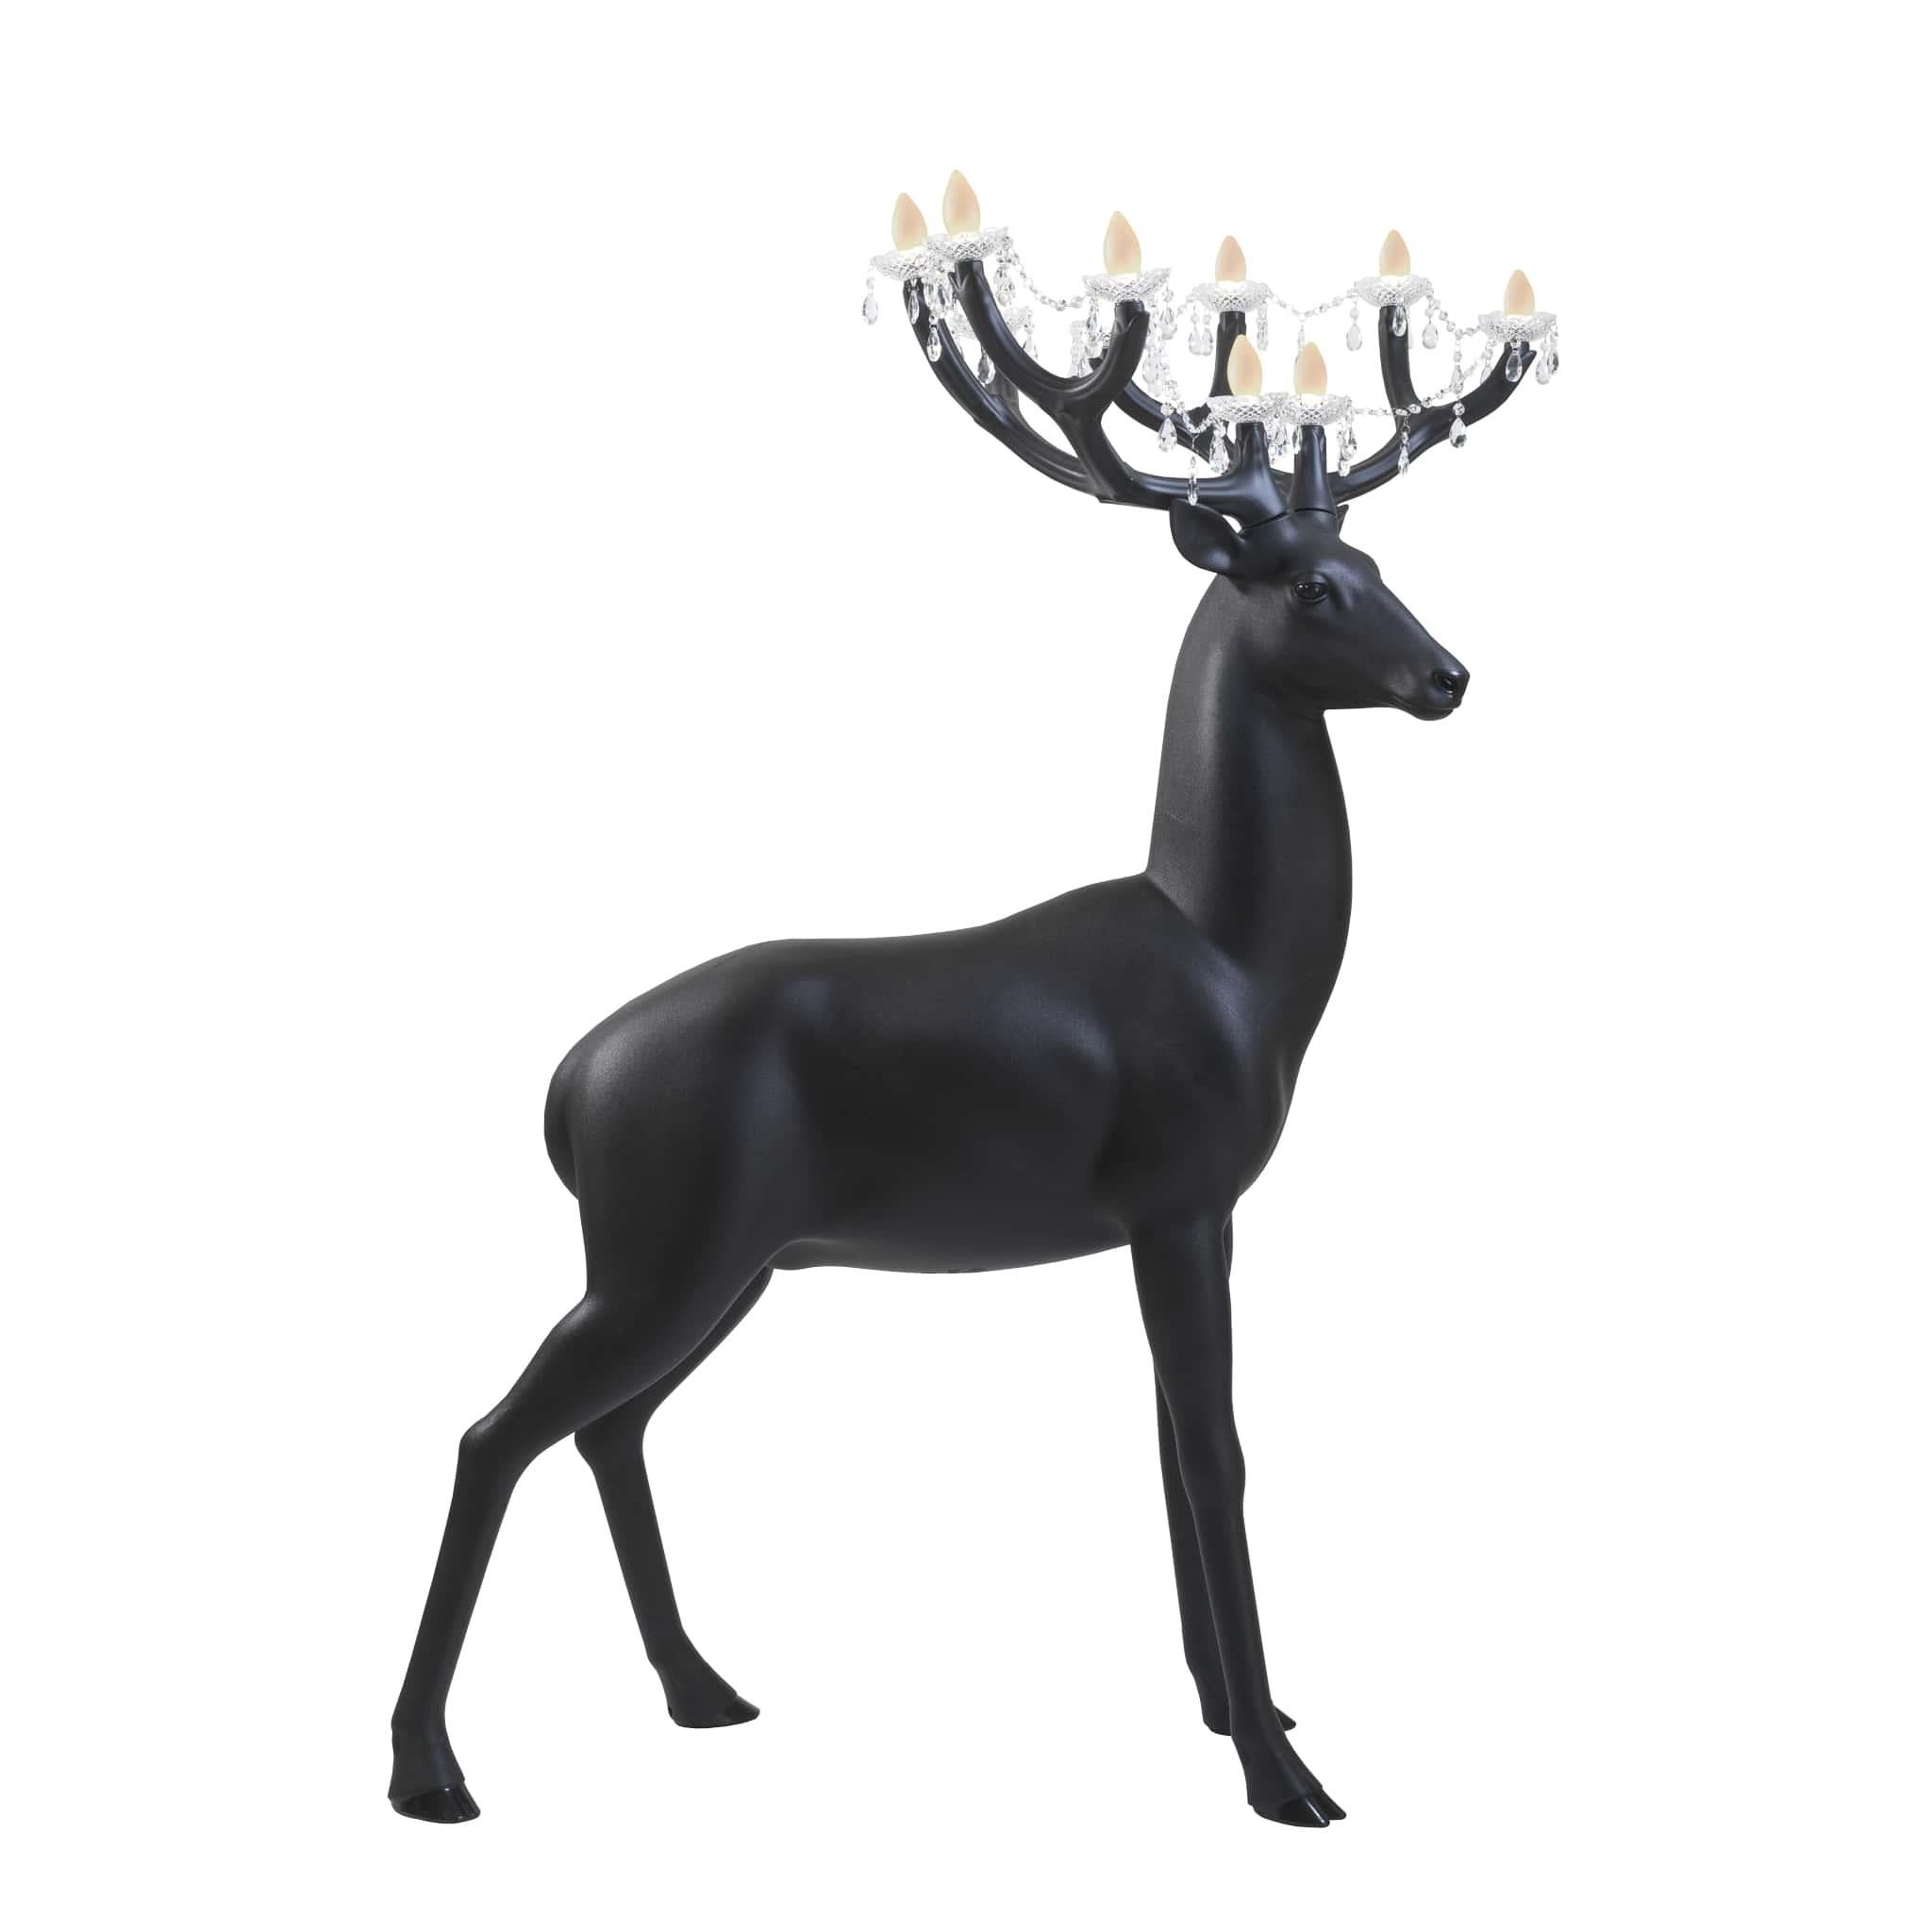 6.5ft Tall Black Sherwood Deer chandelier by Marcantonio

Sherwood is an impressive 2-meter-high deer whose antlers become chandeliers decorated with crystals and pendants.
The strong natural energy of the animal is immortalized by Marcantonio